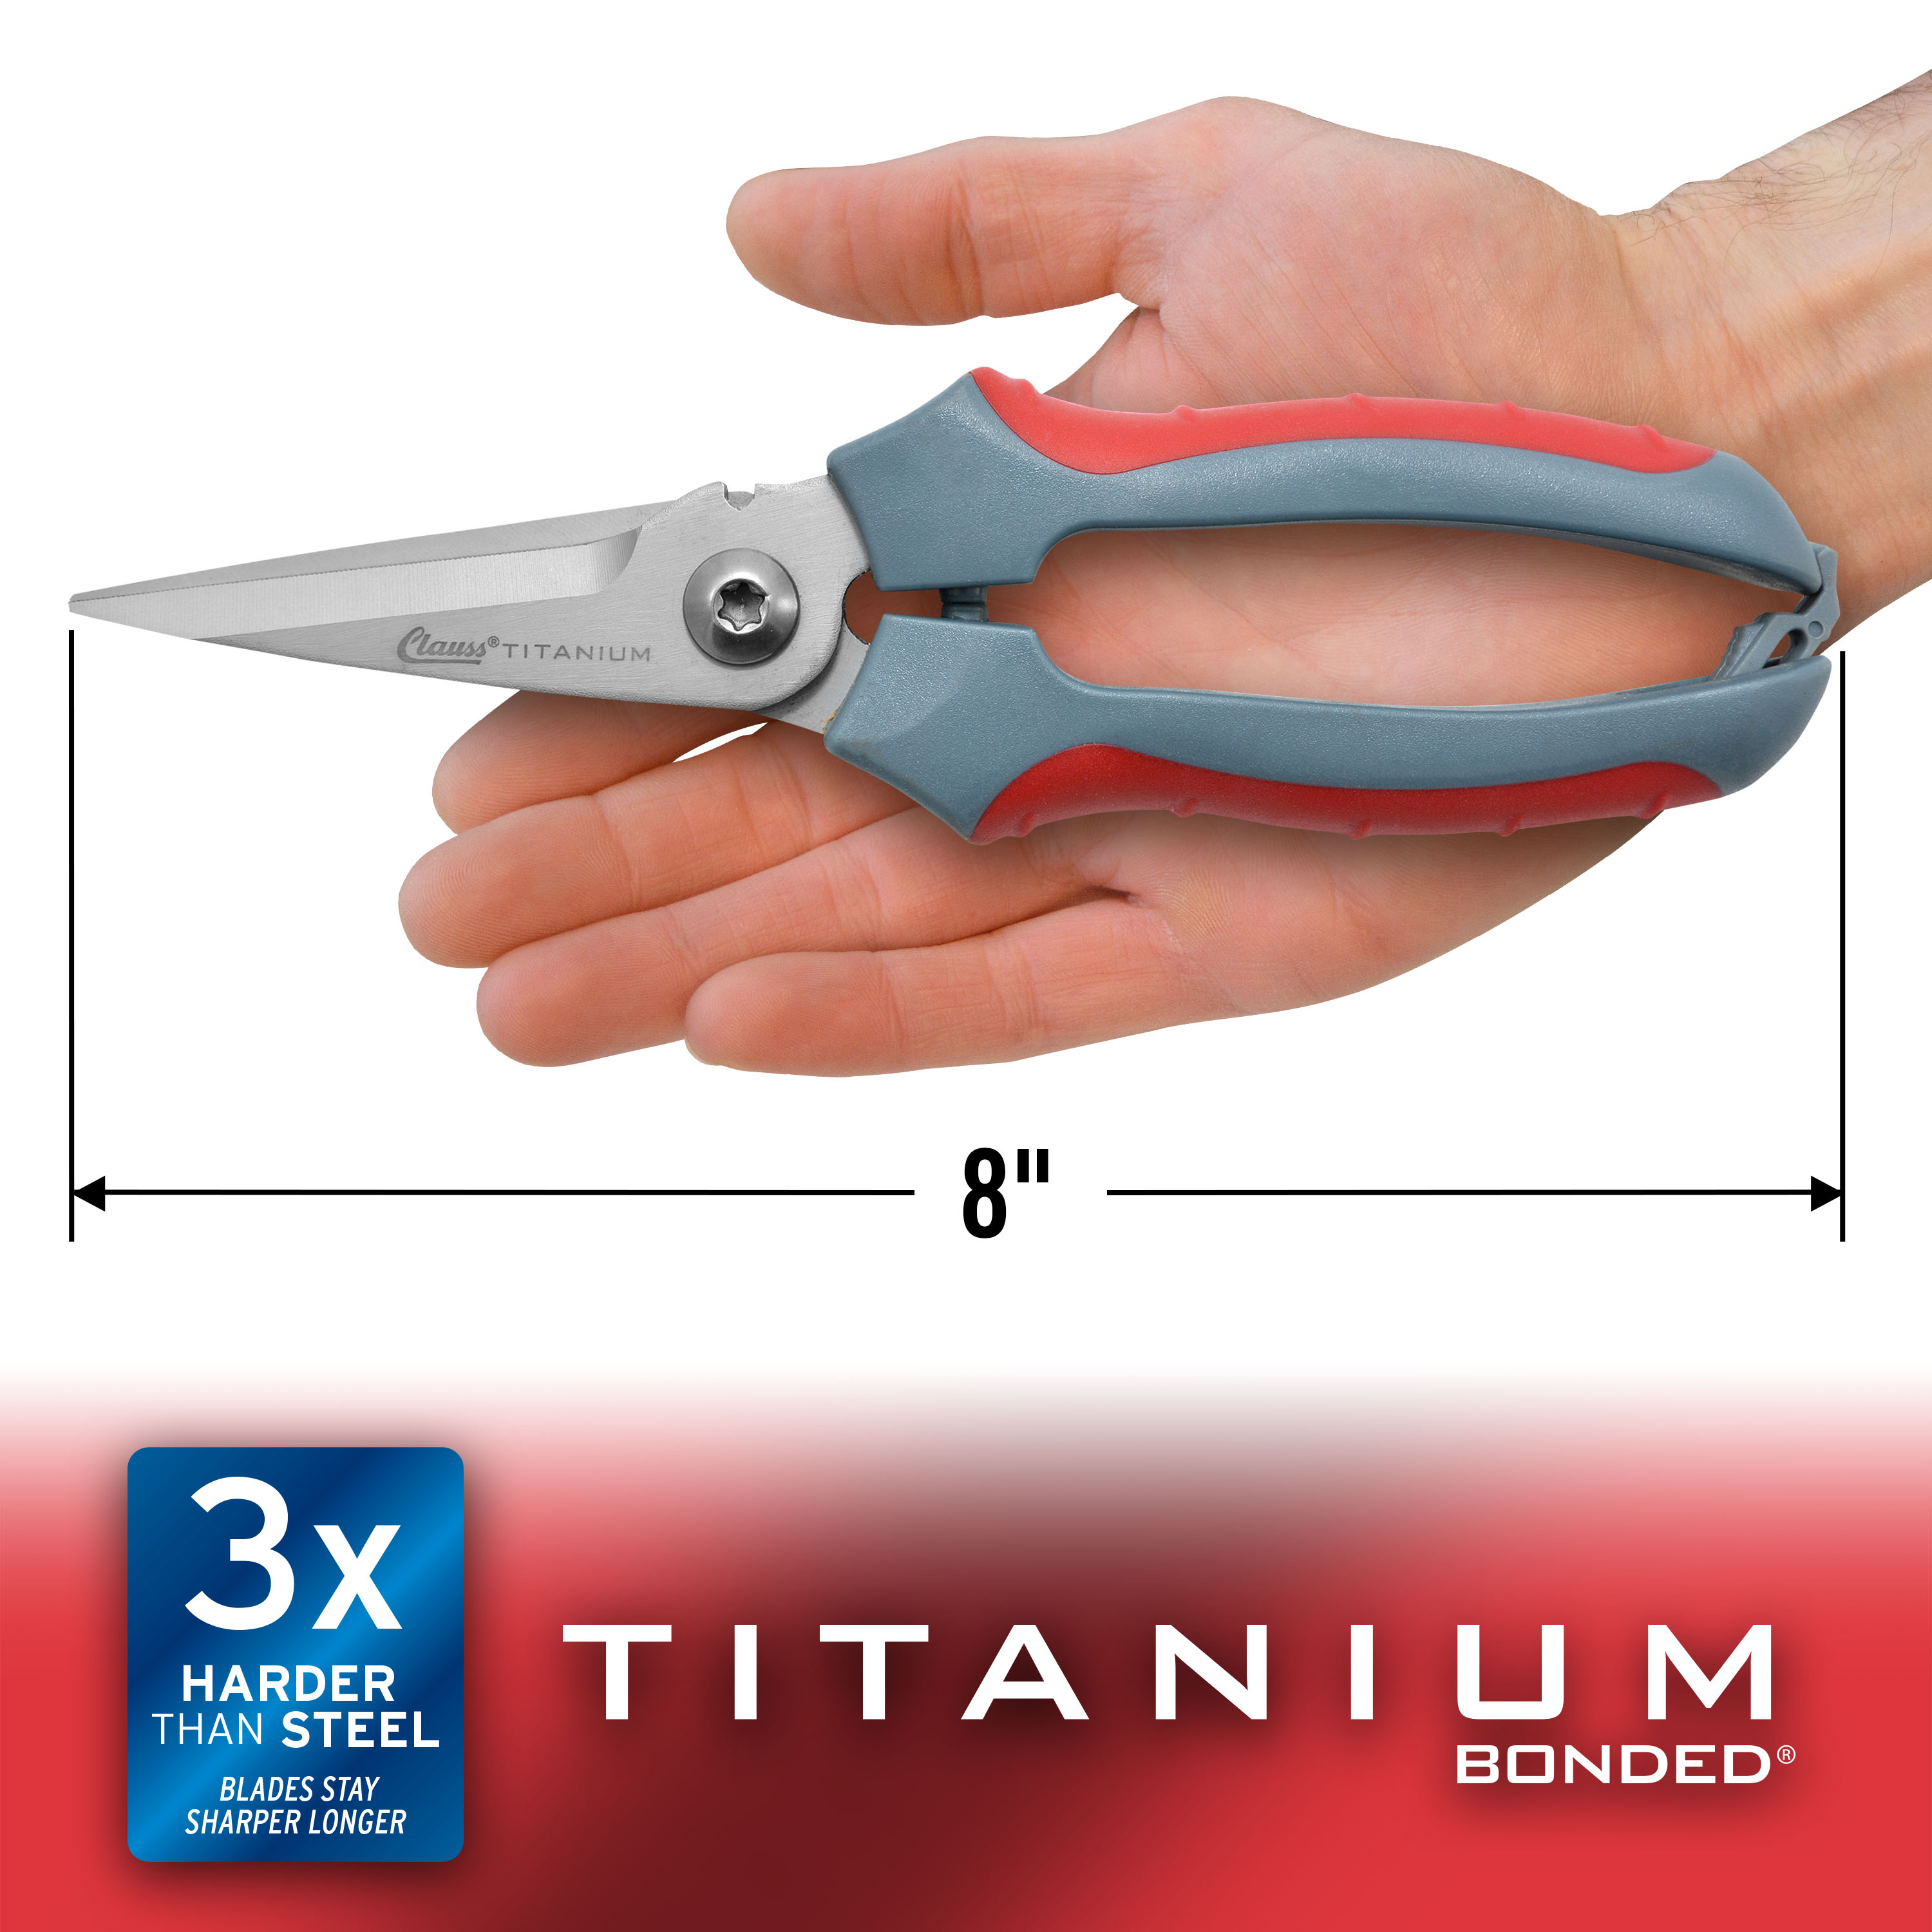 Clauss 8" Titanium Bonded Straight Micro-Serrated Snip, Hand Tool Pliers, Red and Gray - image 5 of 8